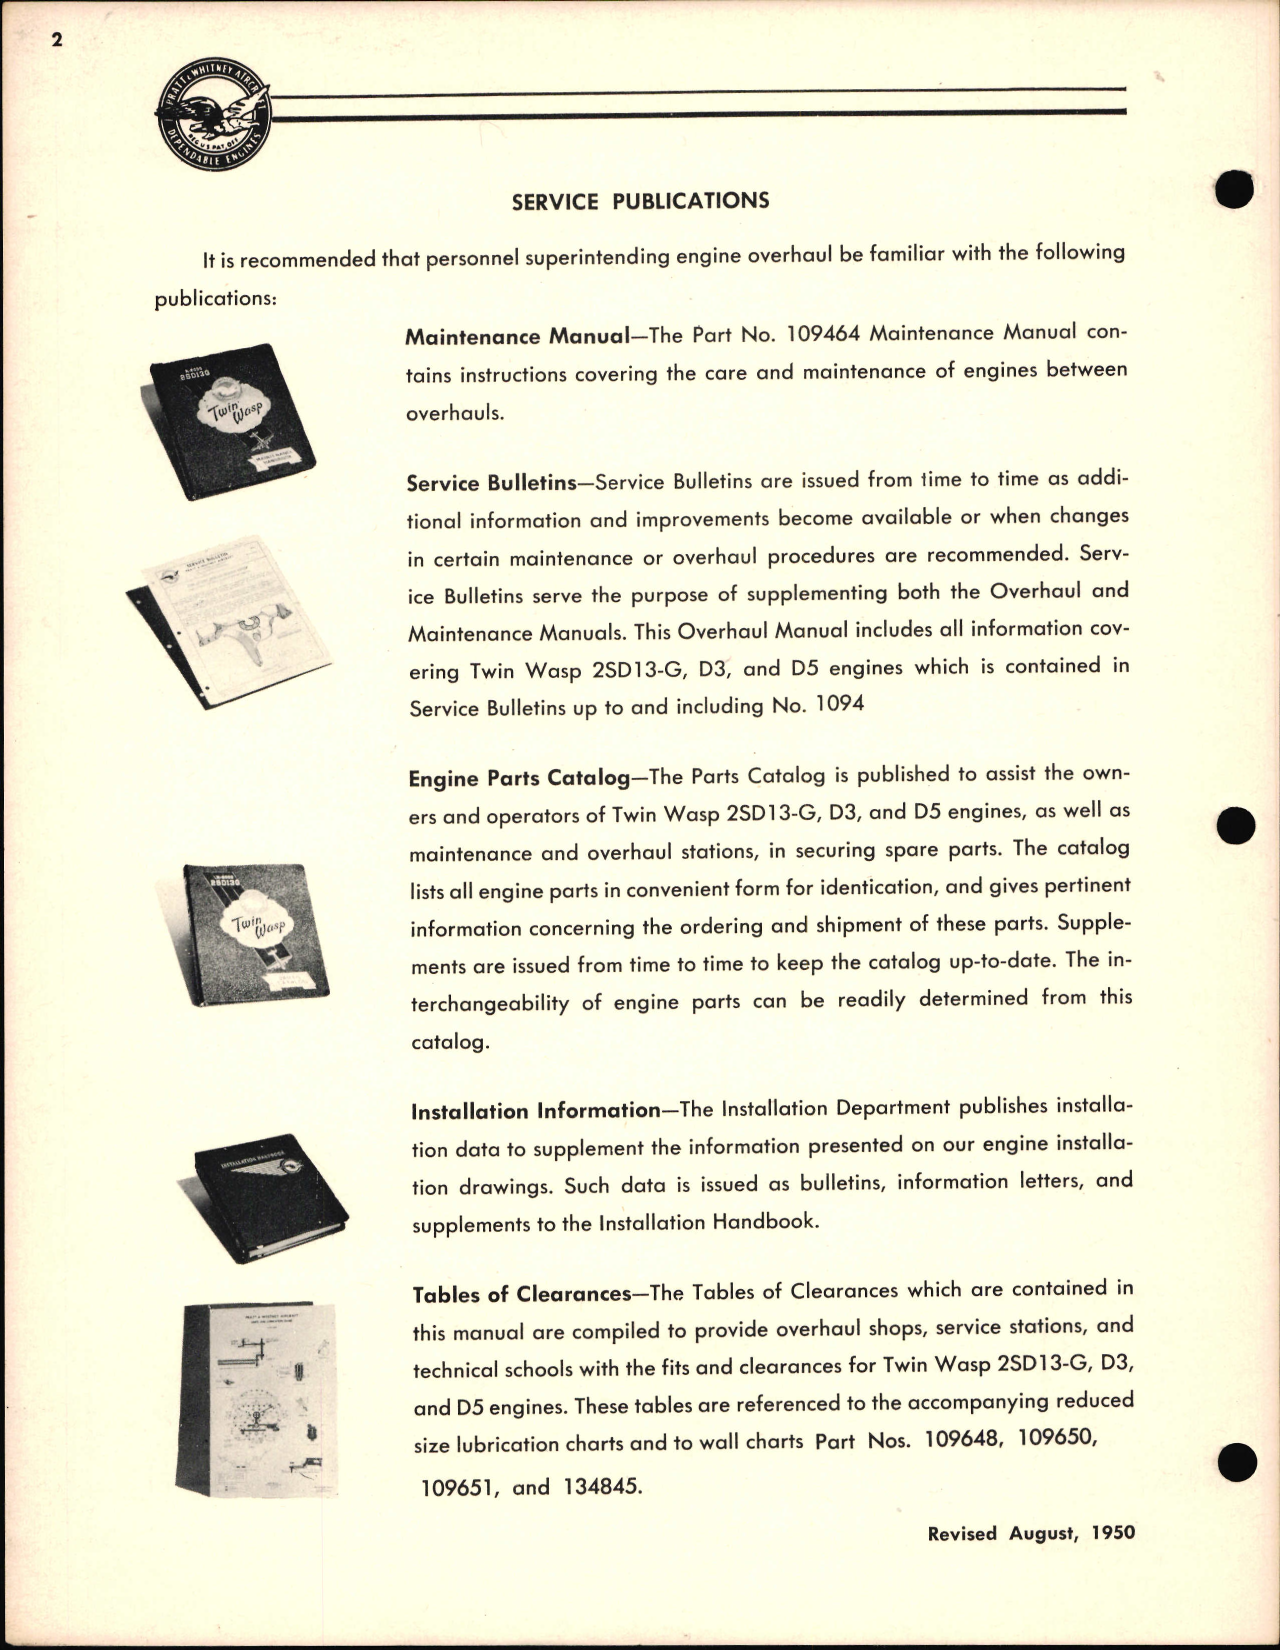 Sample page 6 from AirCorps Library document: Overhaul Manual for Twin Wasp 2SD13-G, D3, and D5 Engines